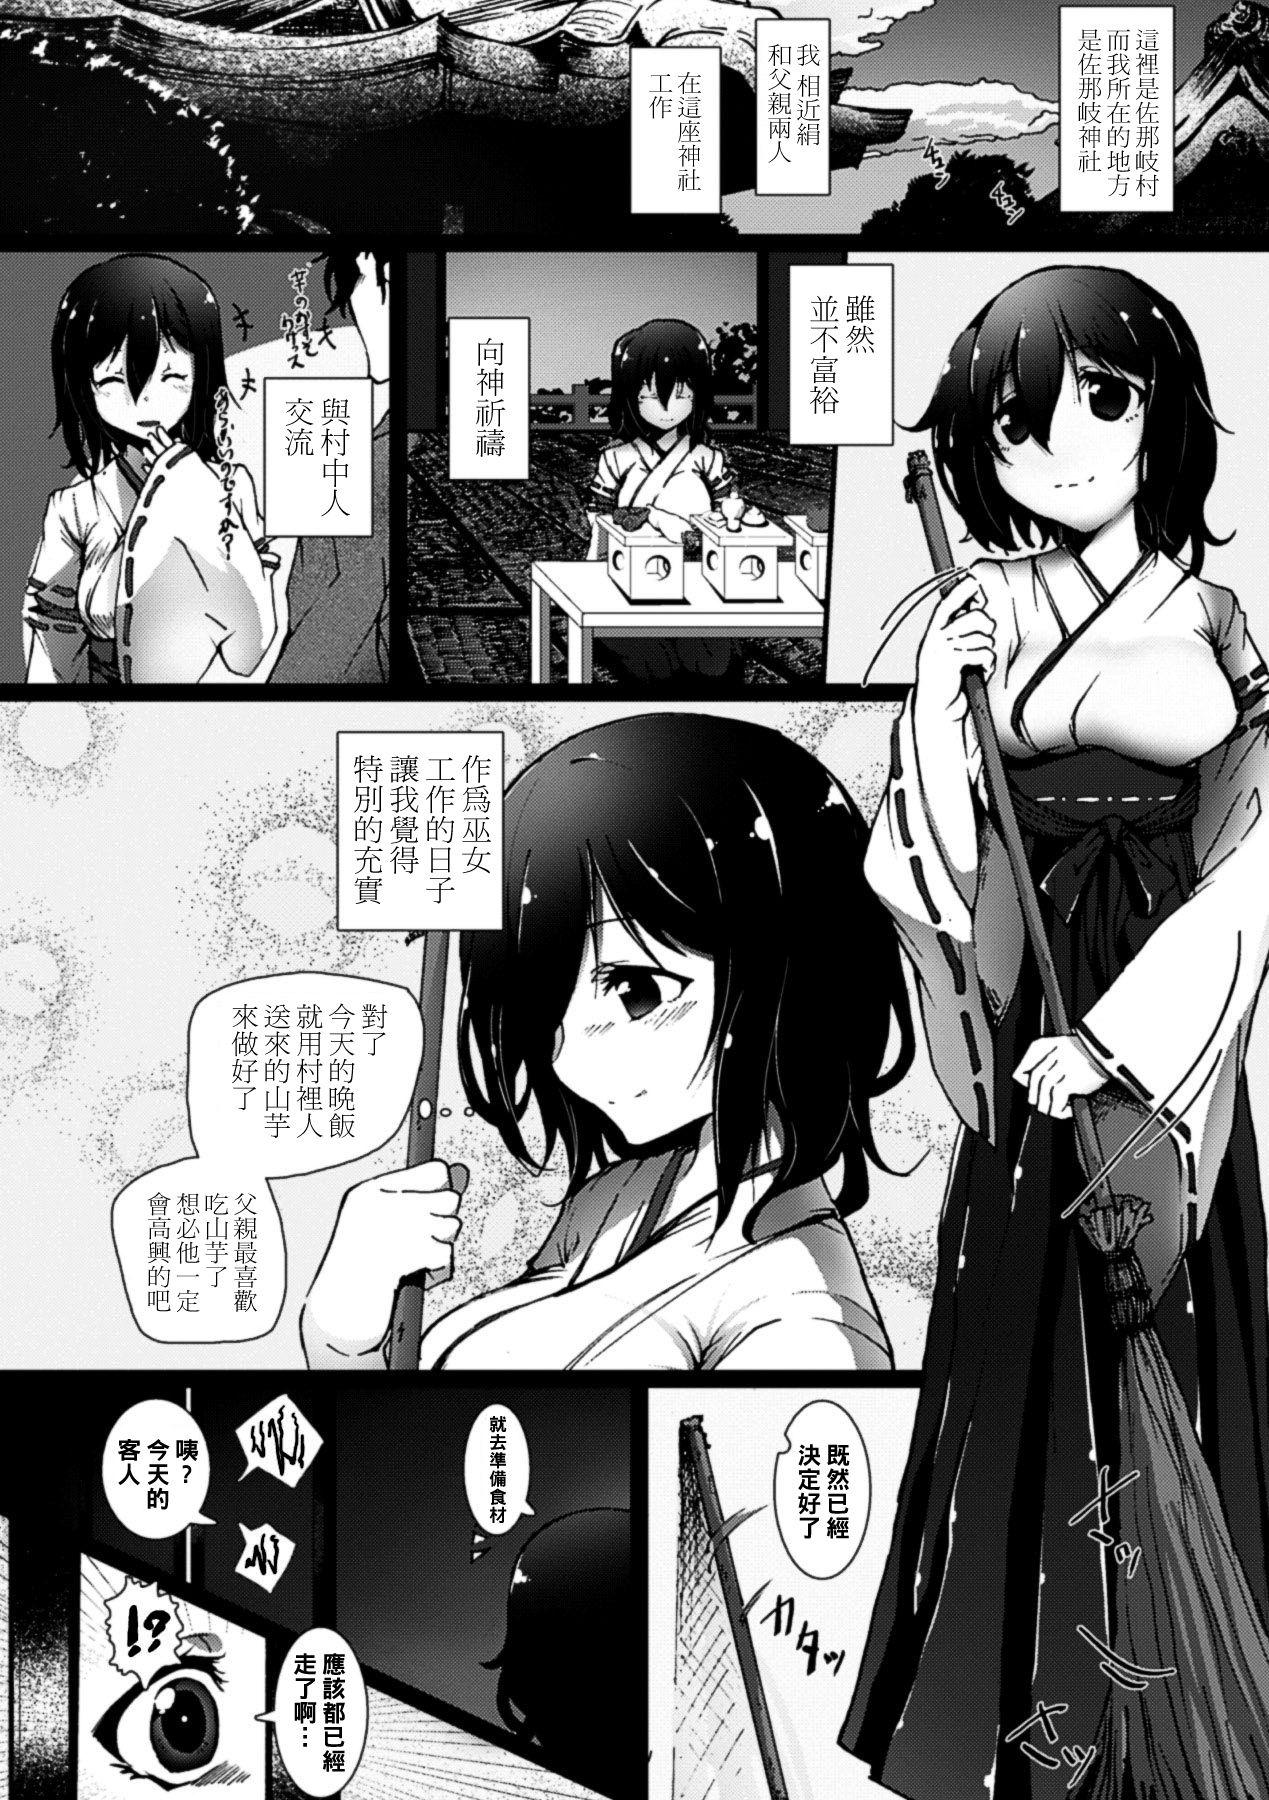 Load Kabe Miko Boys - Page 2